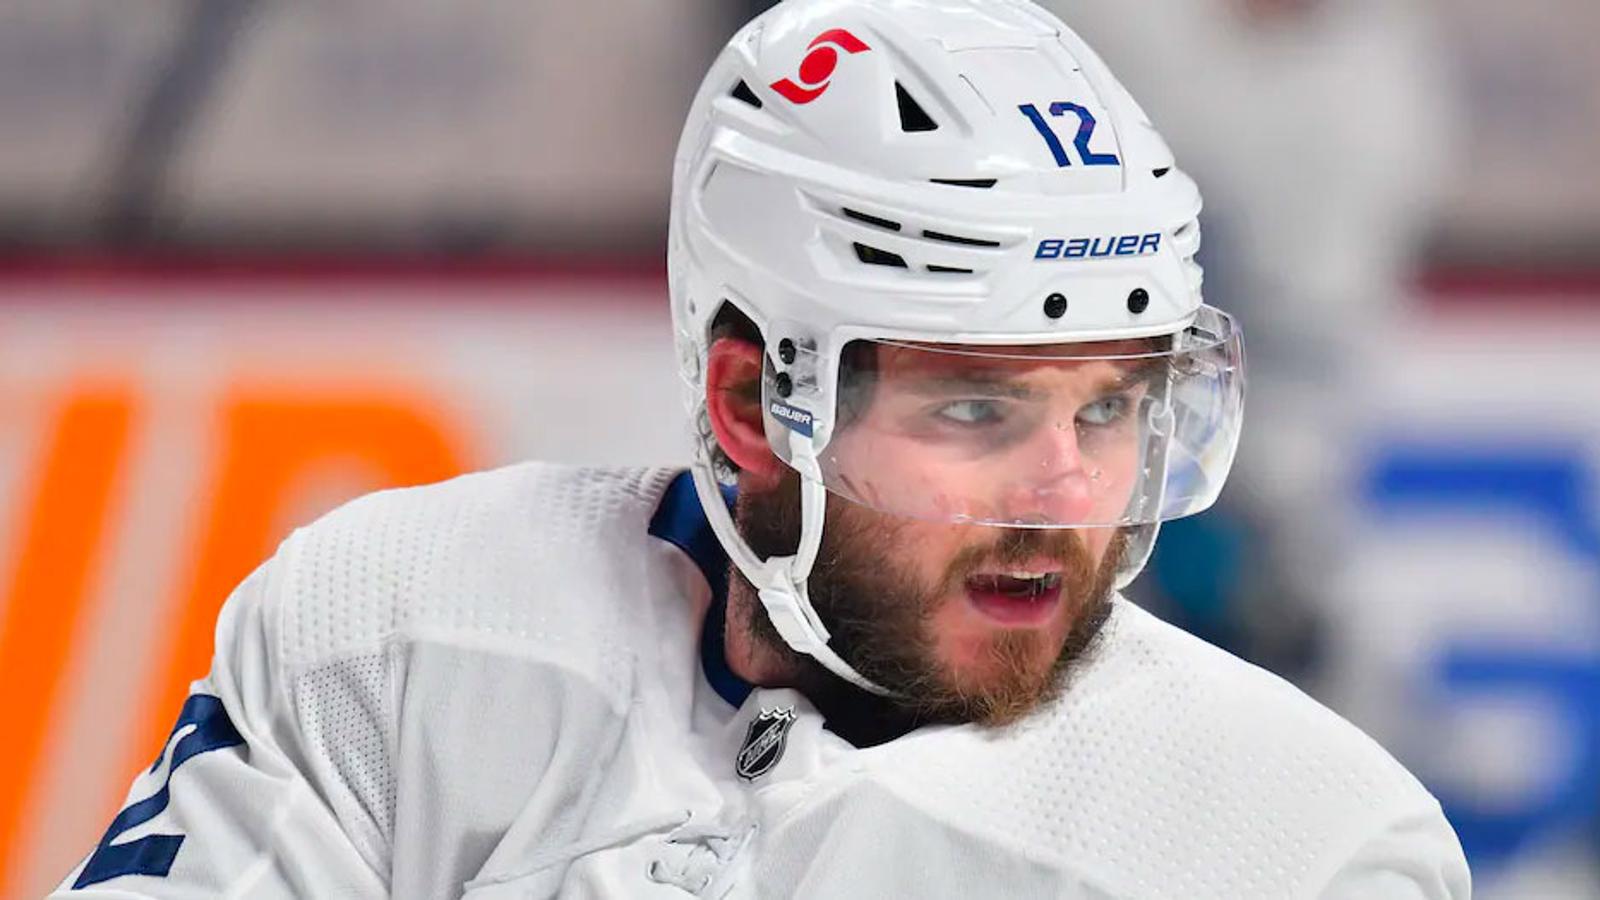 Alex Galchenyuk signs a professional tryout (PTO) contract